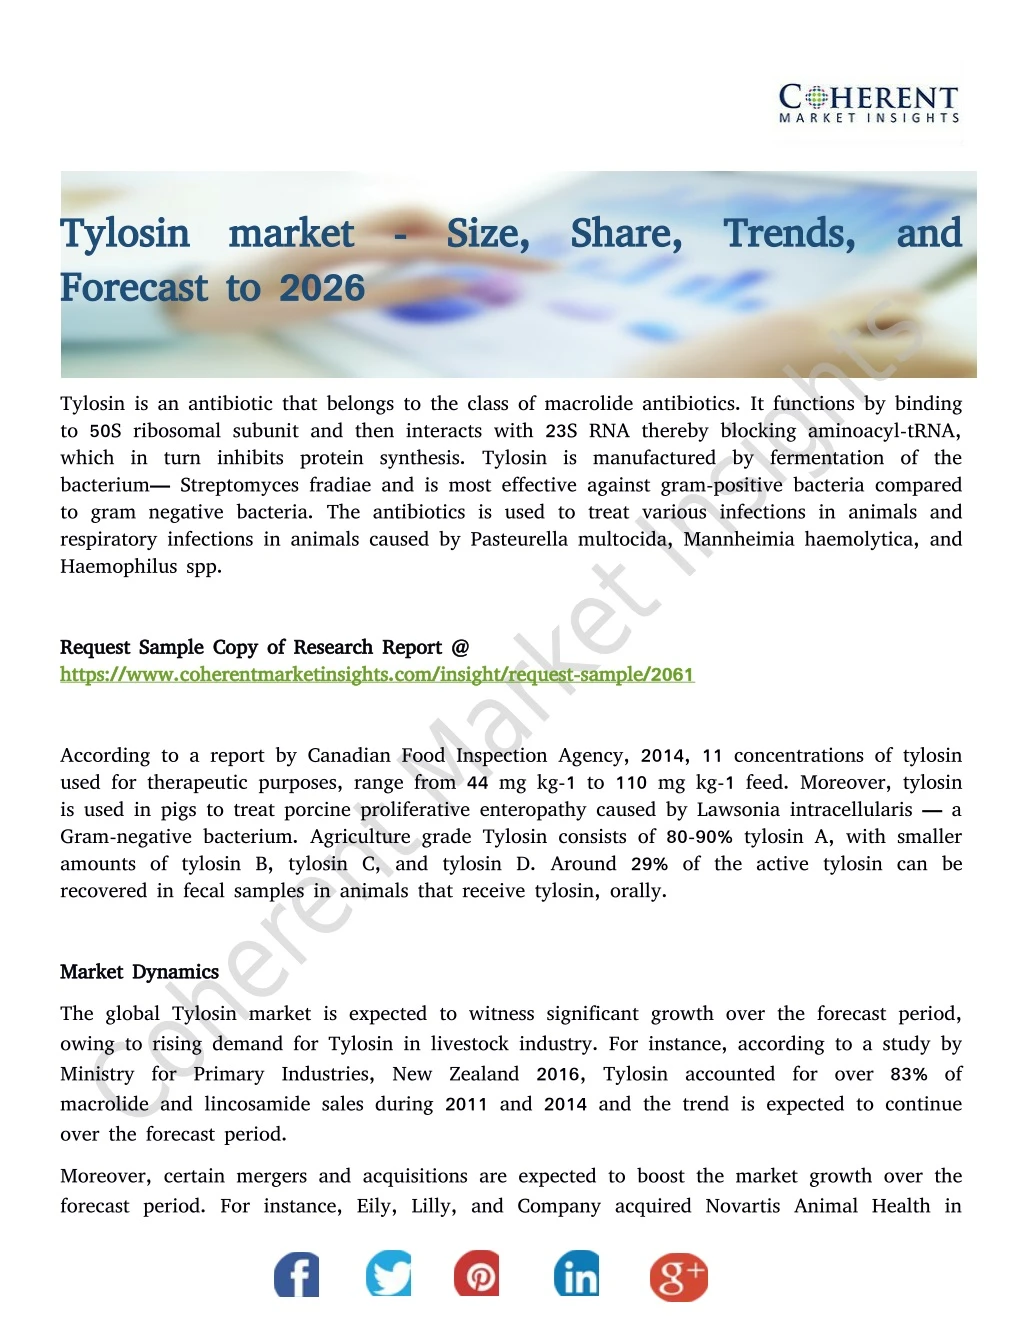 tylosin market size share trends and tylosin